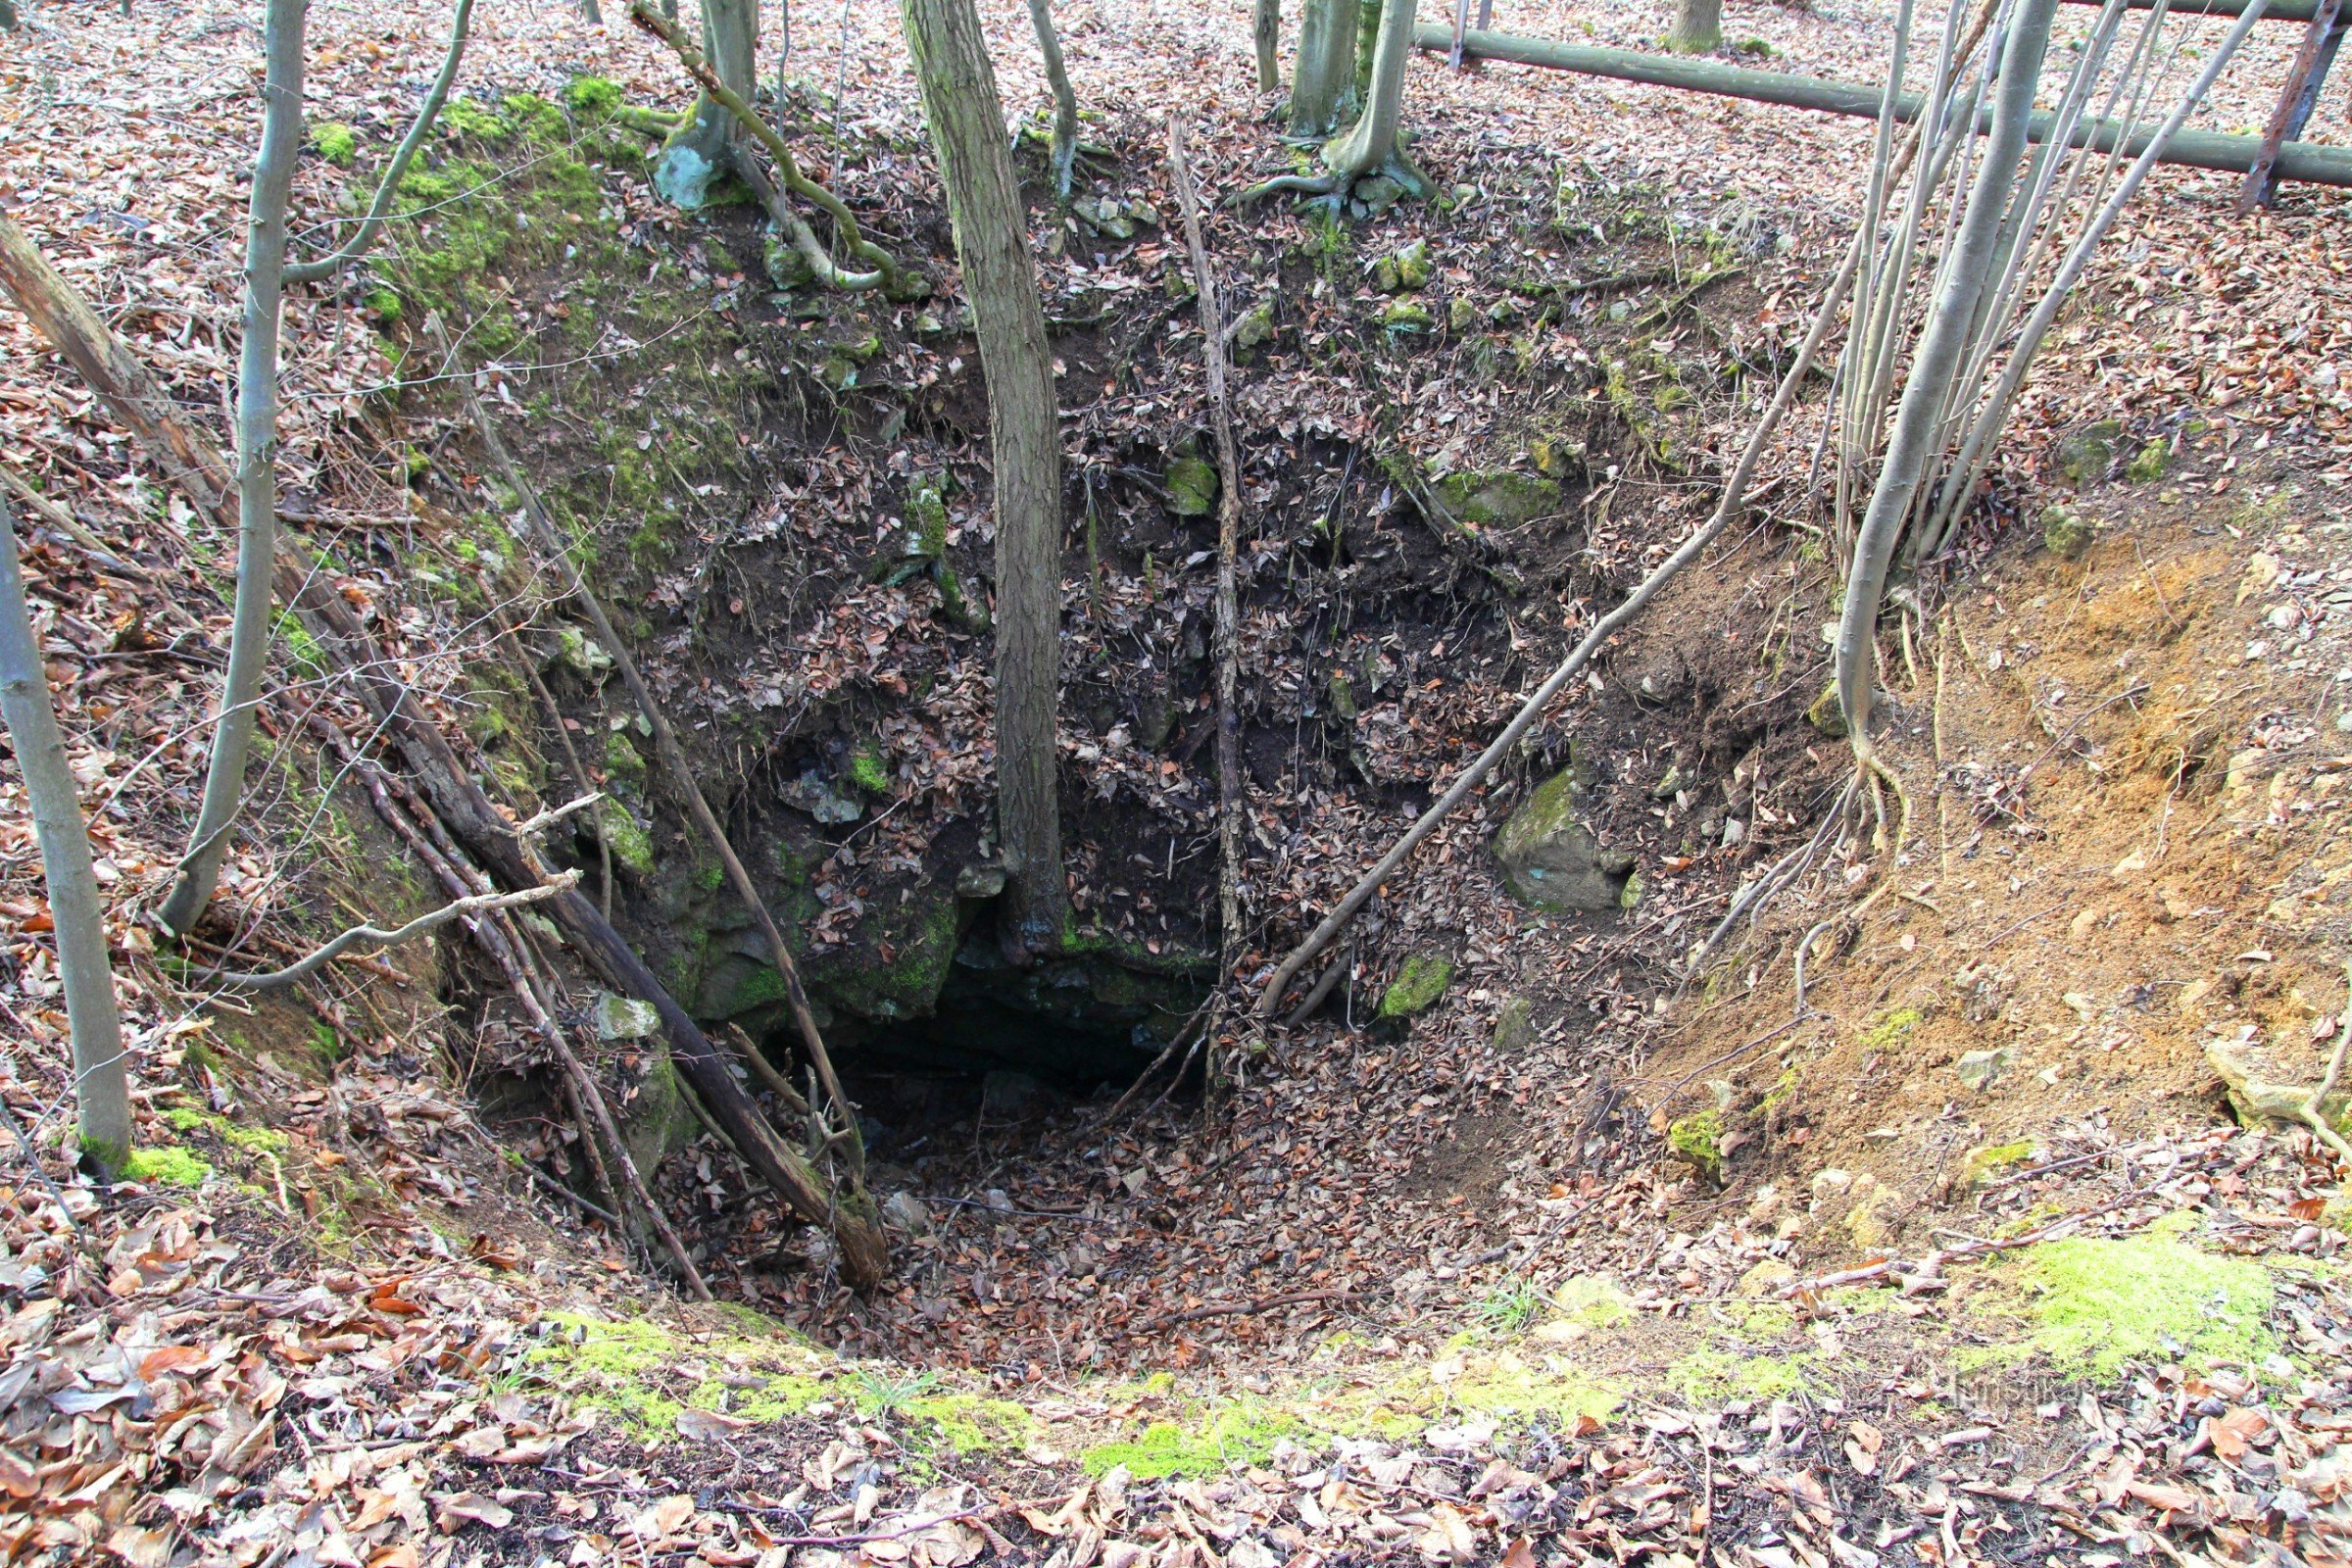 Coral sinkhole in its present form